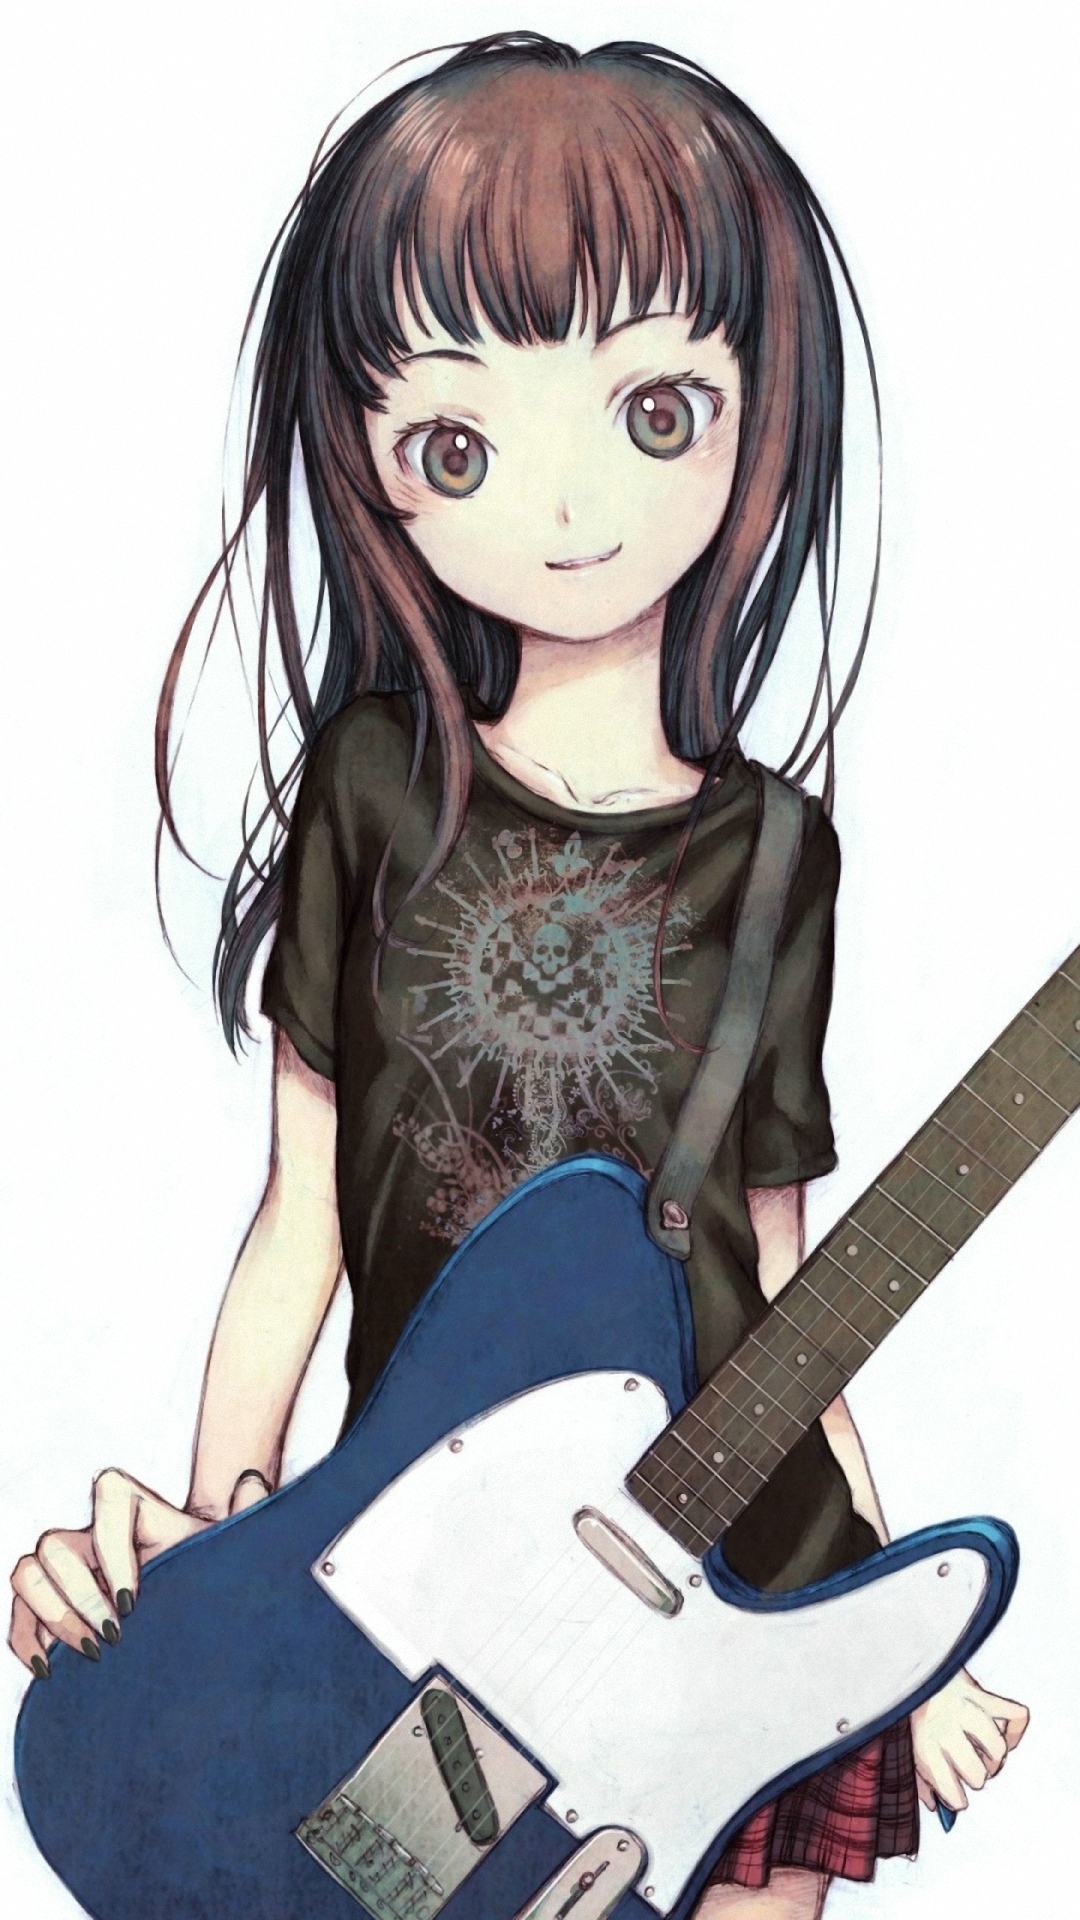 wallpaper hd 1080p free download for android,guitar,guitarist,cartoon,anime,hime cut